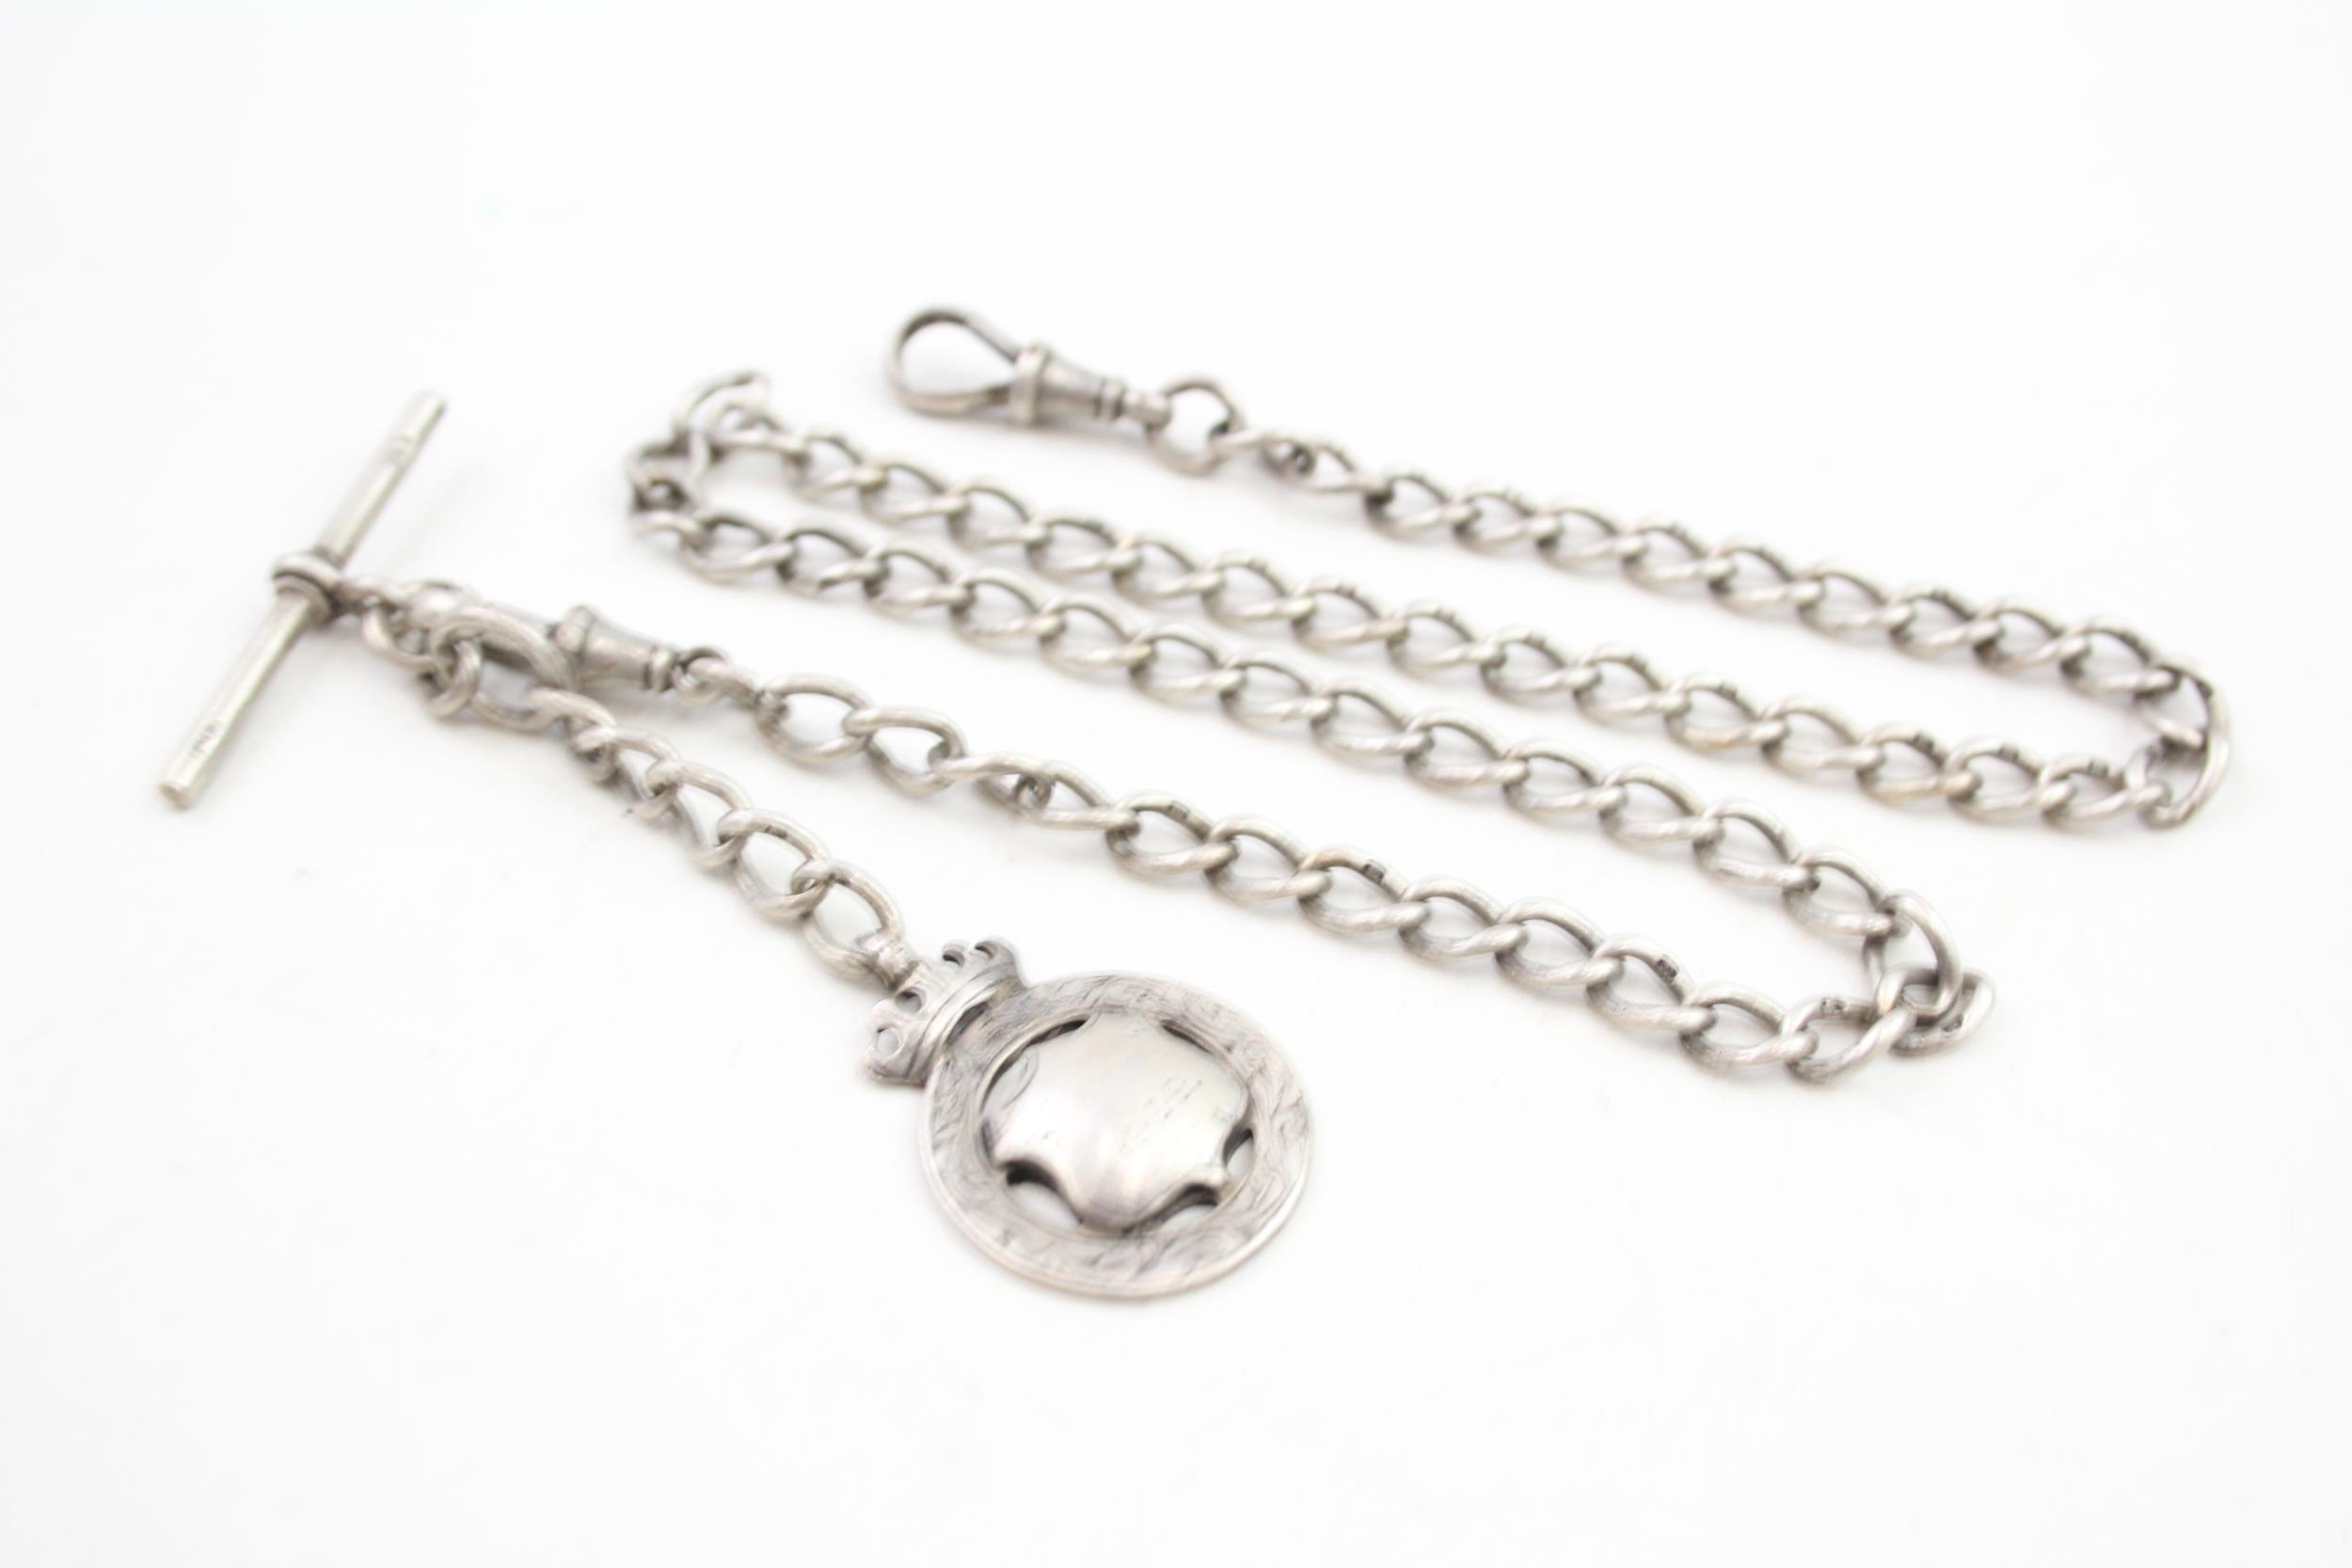 Antique Edwardian sterling silver watch chain and fob (48g)